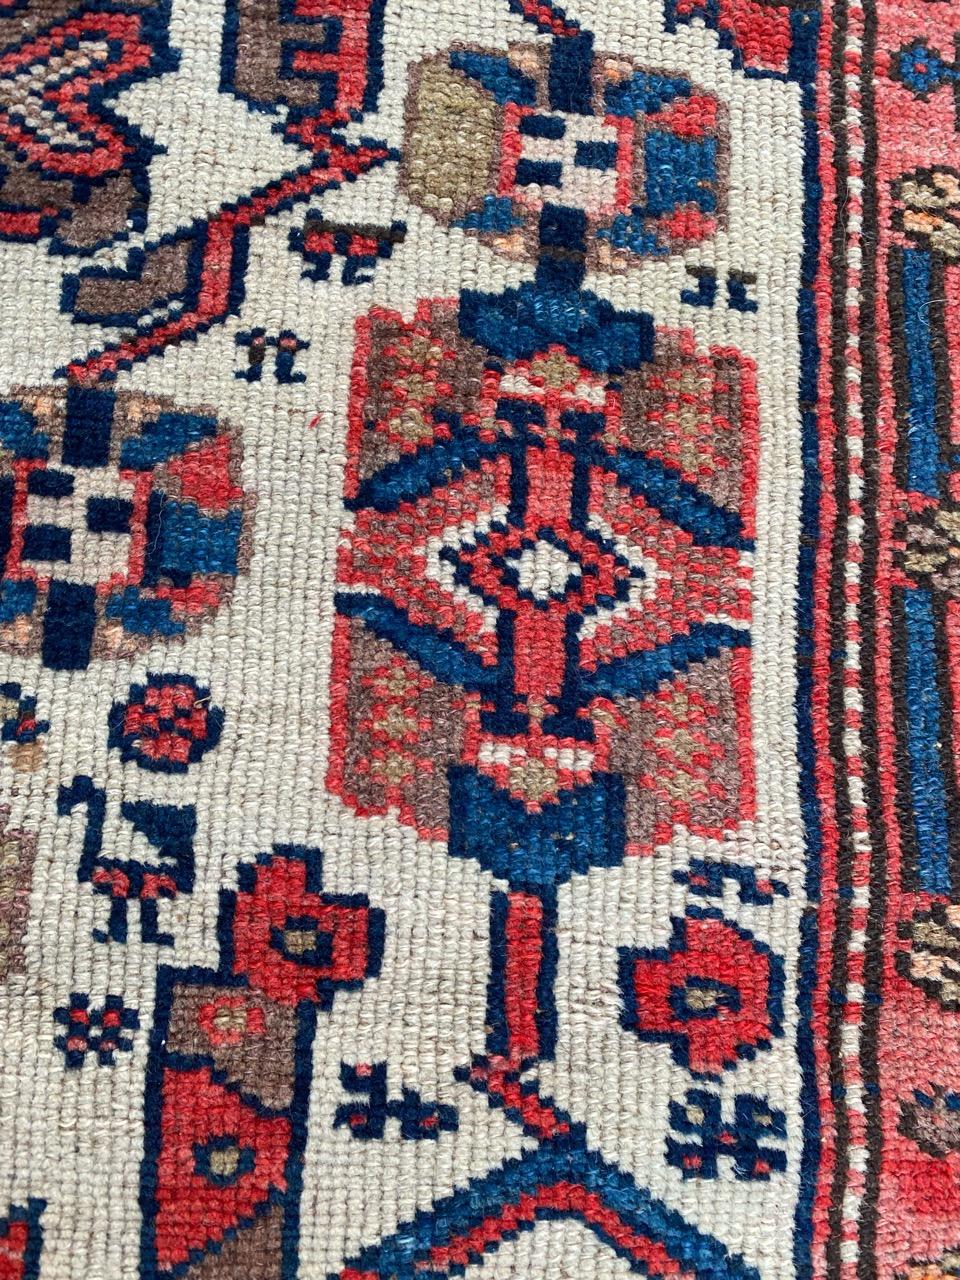 Bobyrug’s Pretty Antique Malayer Rug For Sale 5